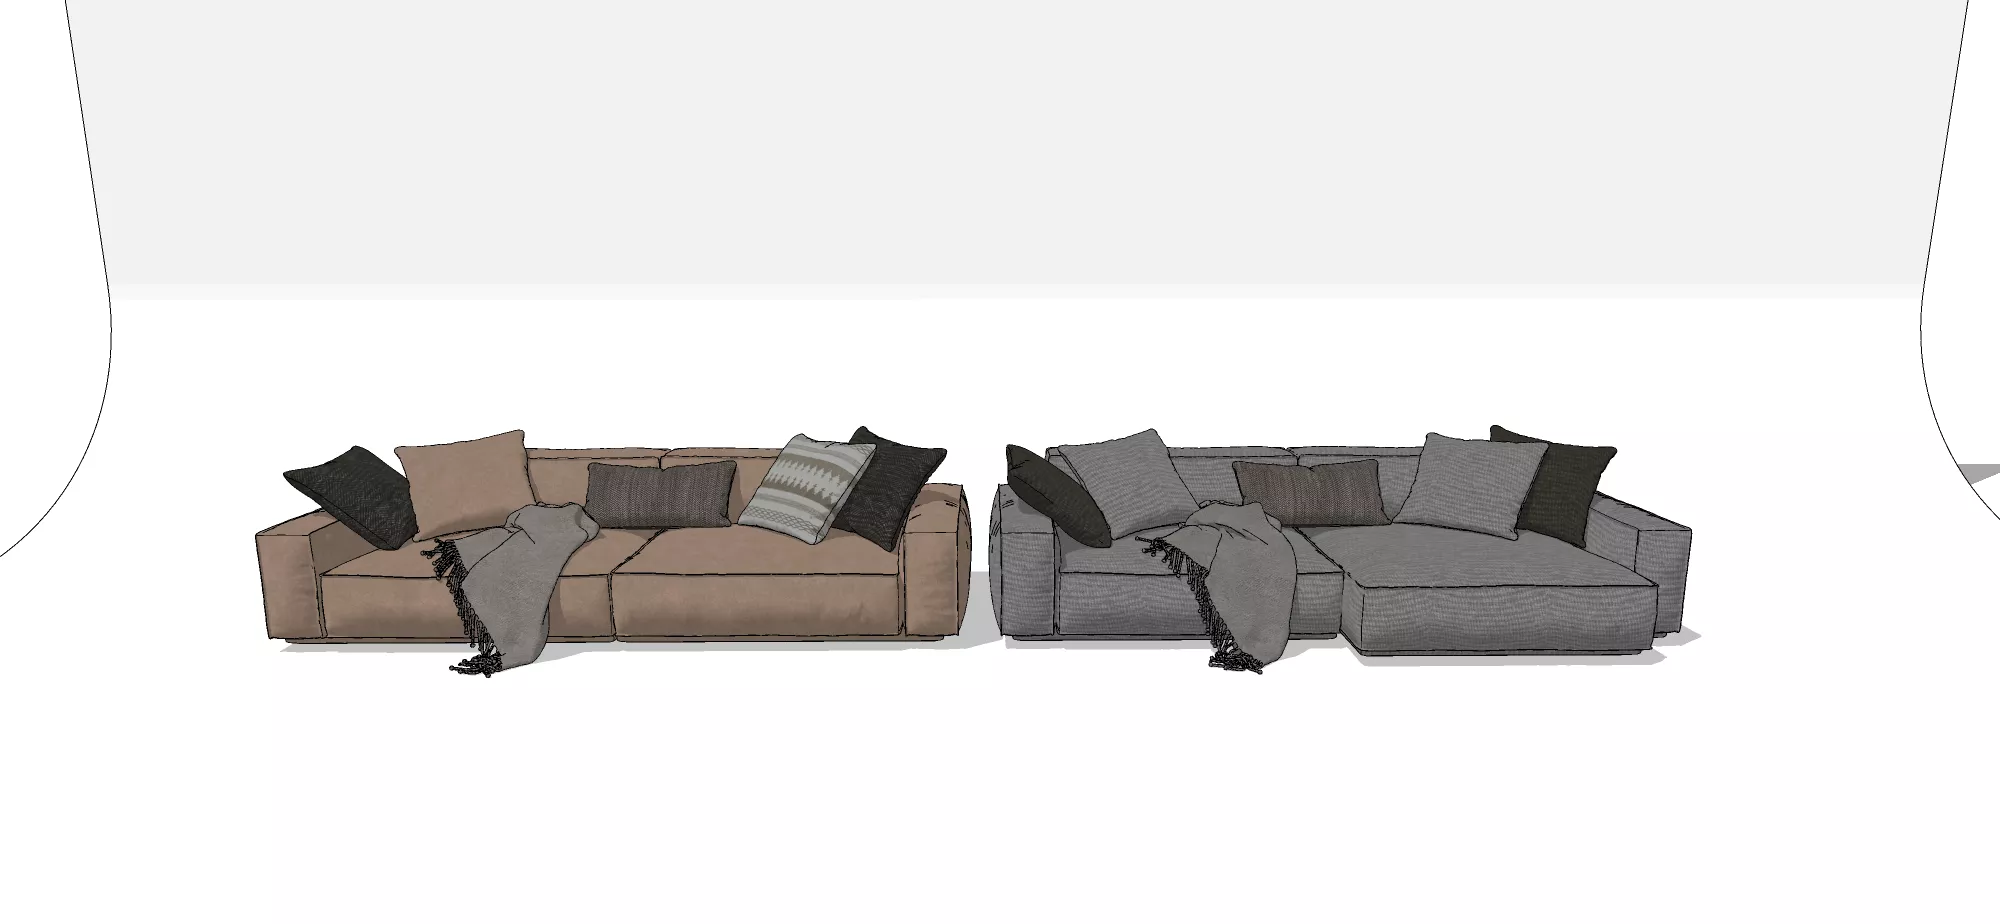 MODERN SOFA - SKETCHUP 3D MODEL - VRAY OR ENSCAPE - ID13111